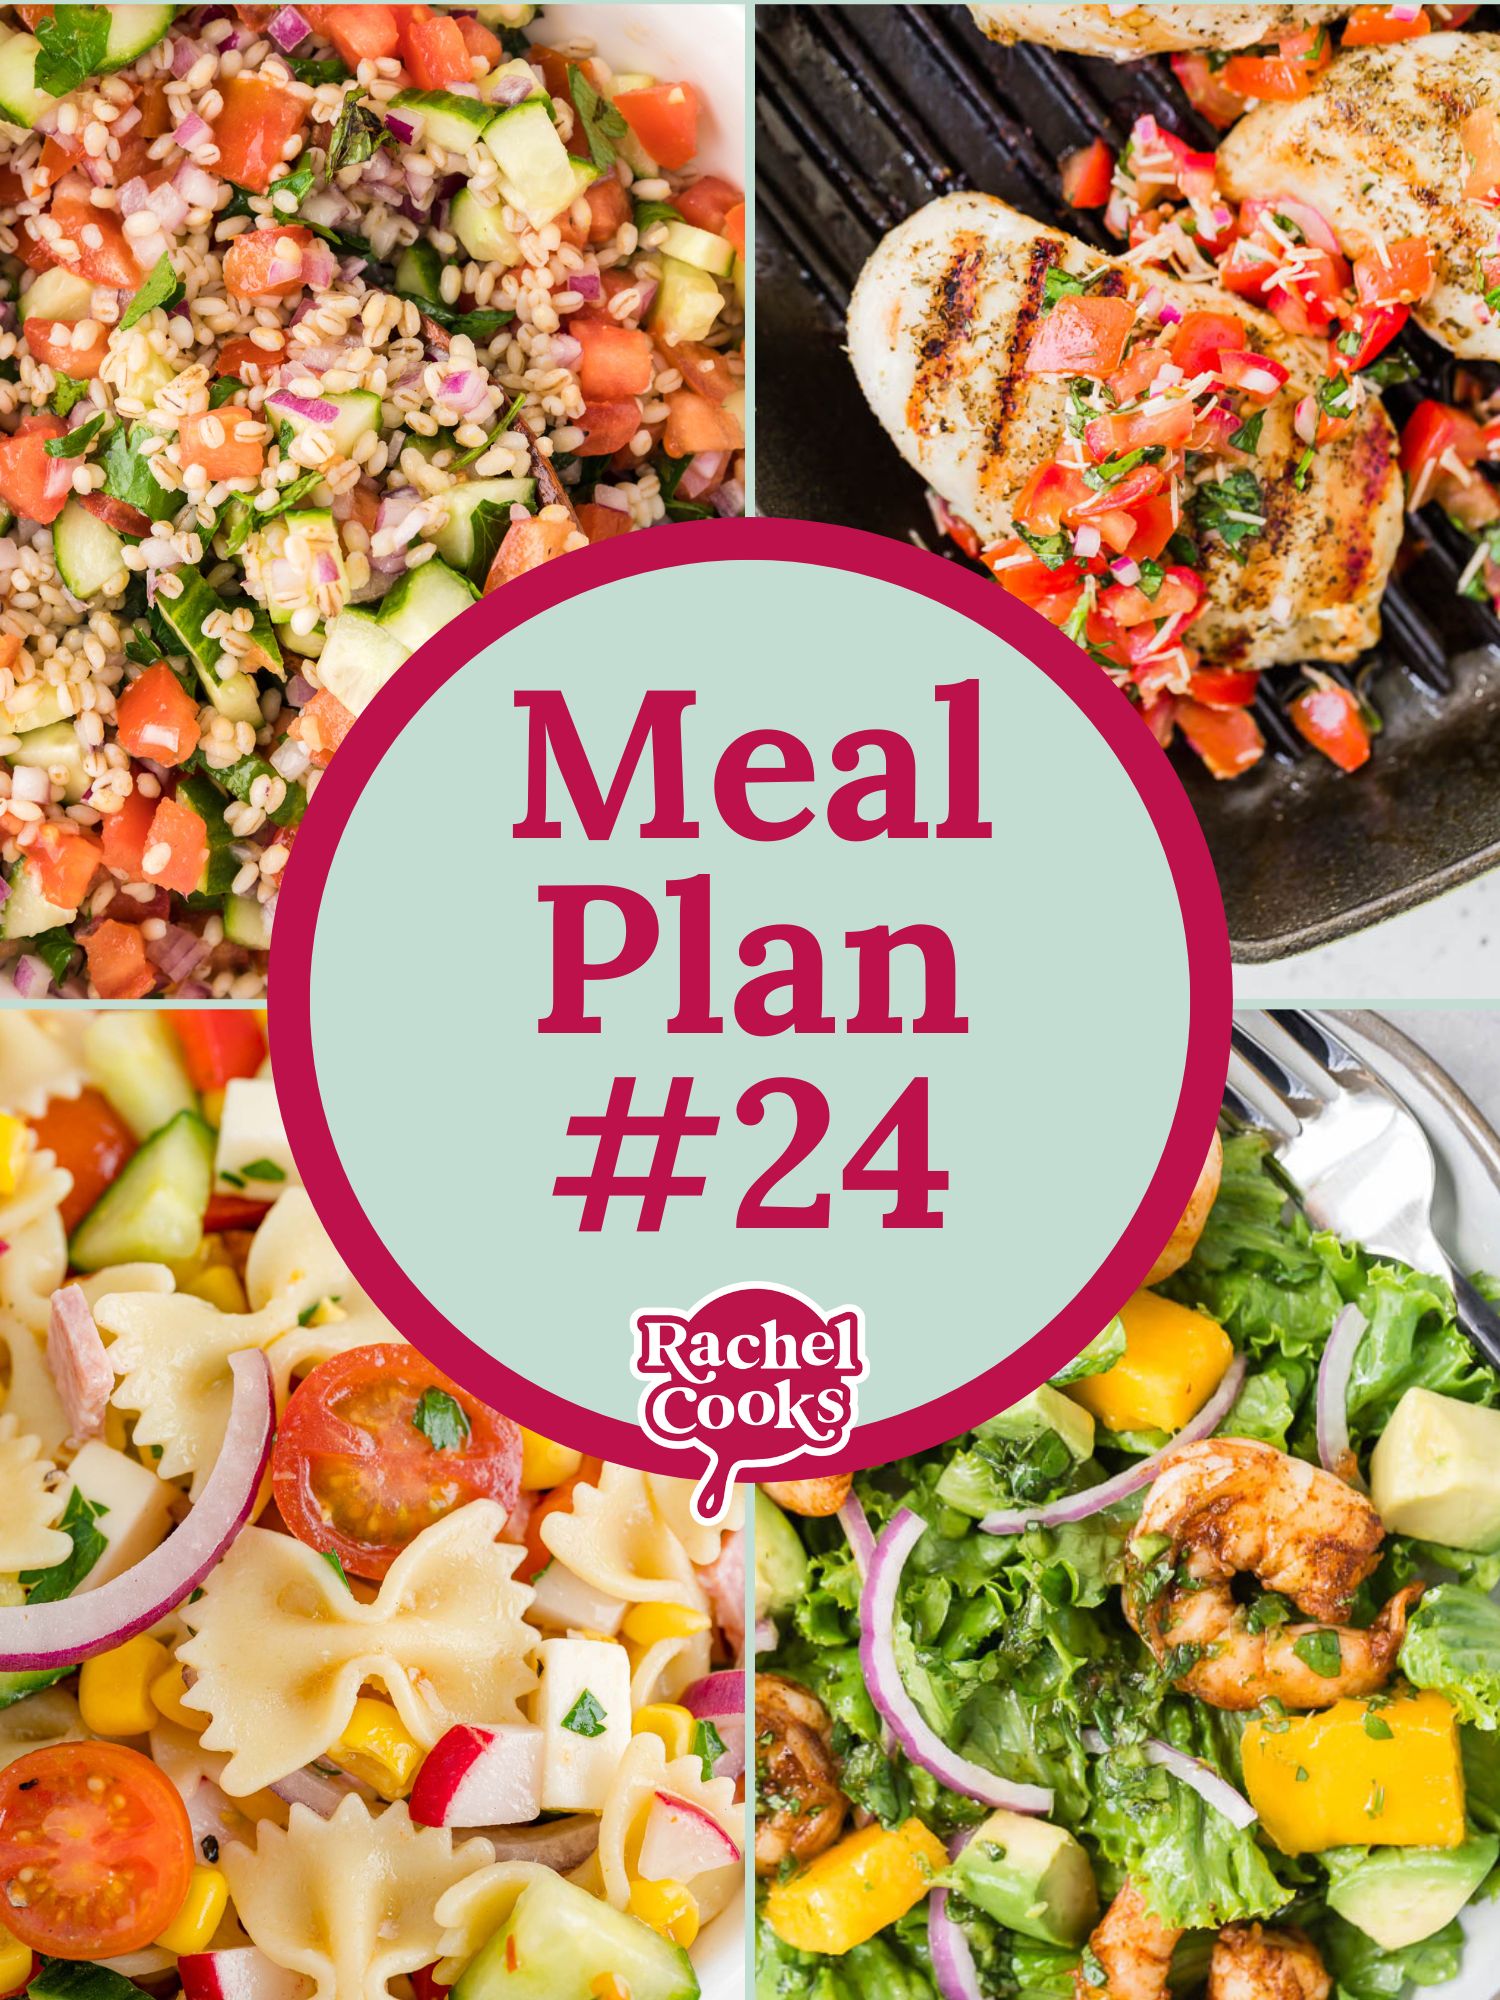 Meal plan 24 graphic with text and recipe images.